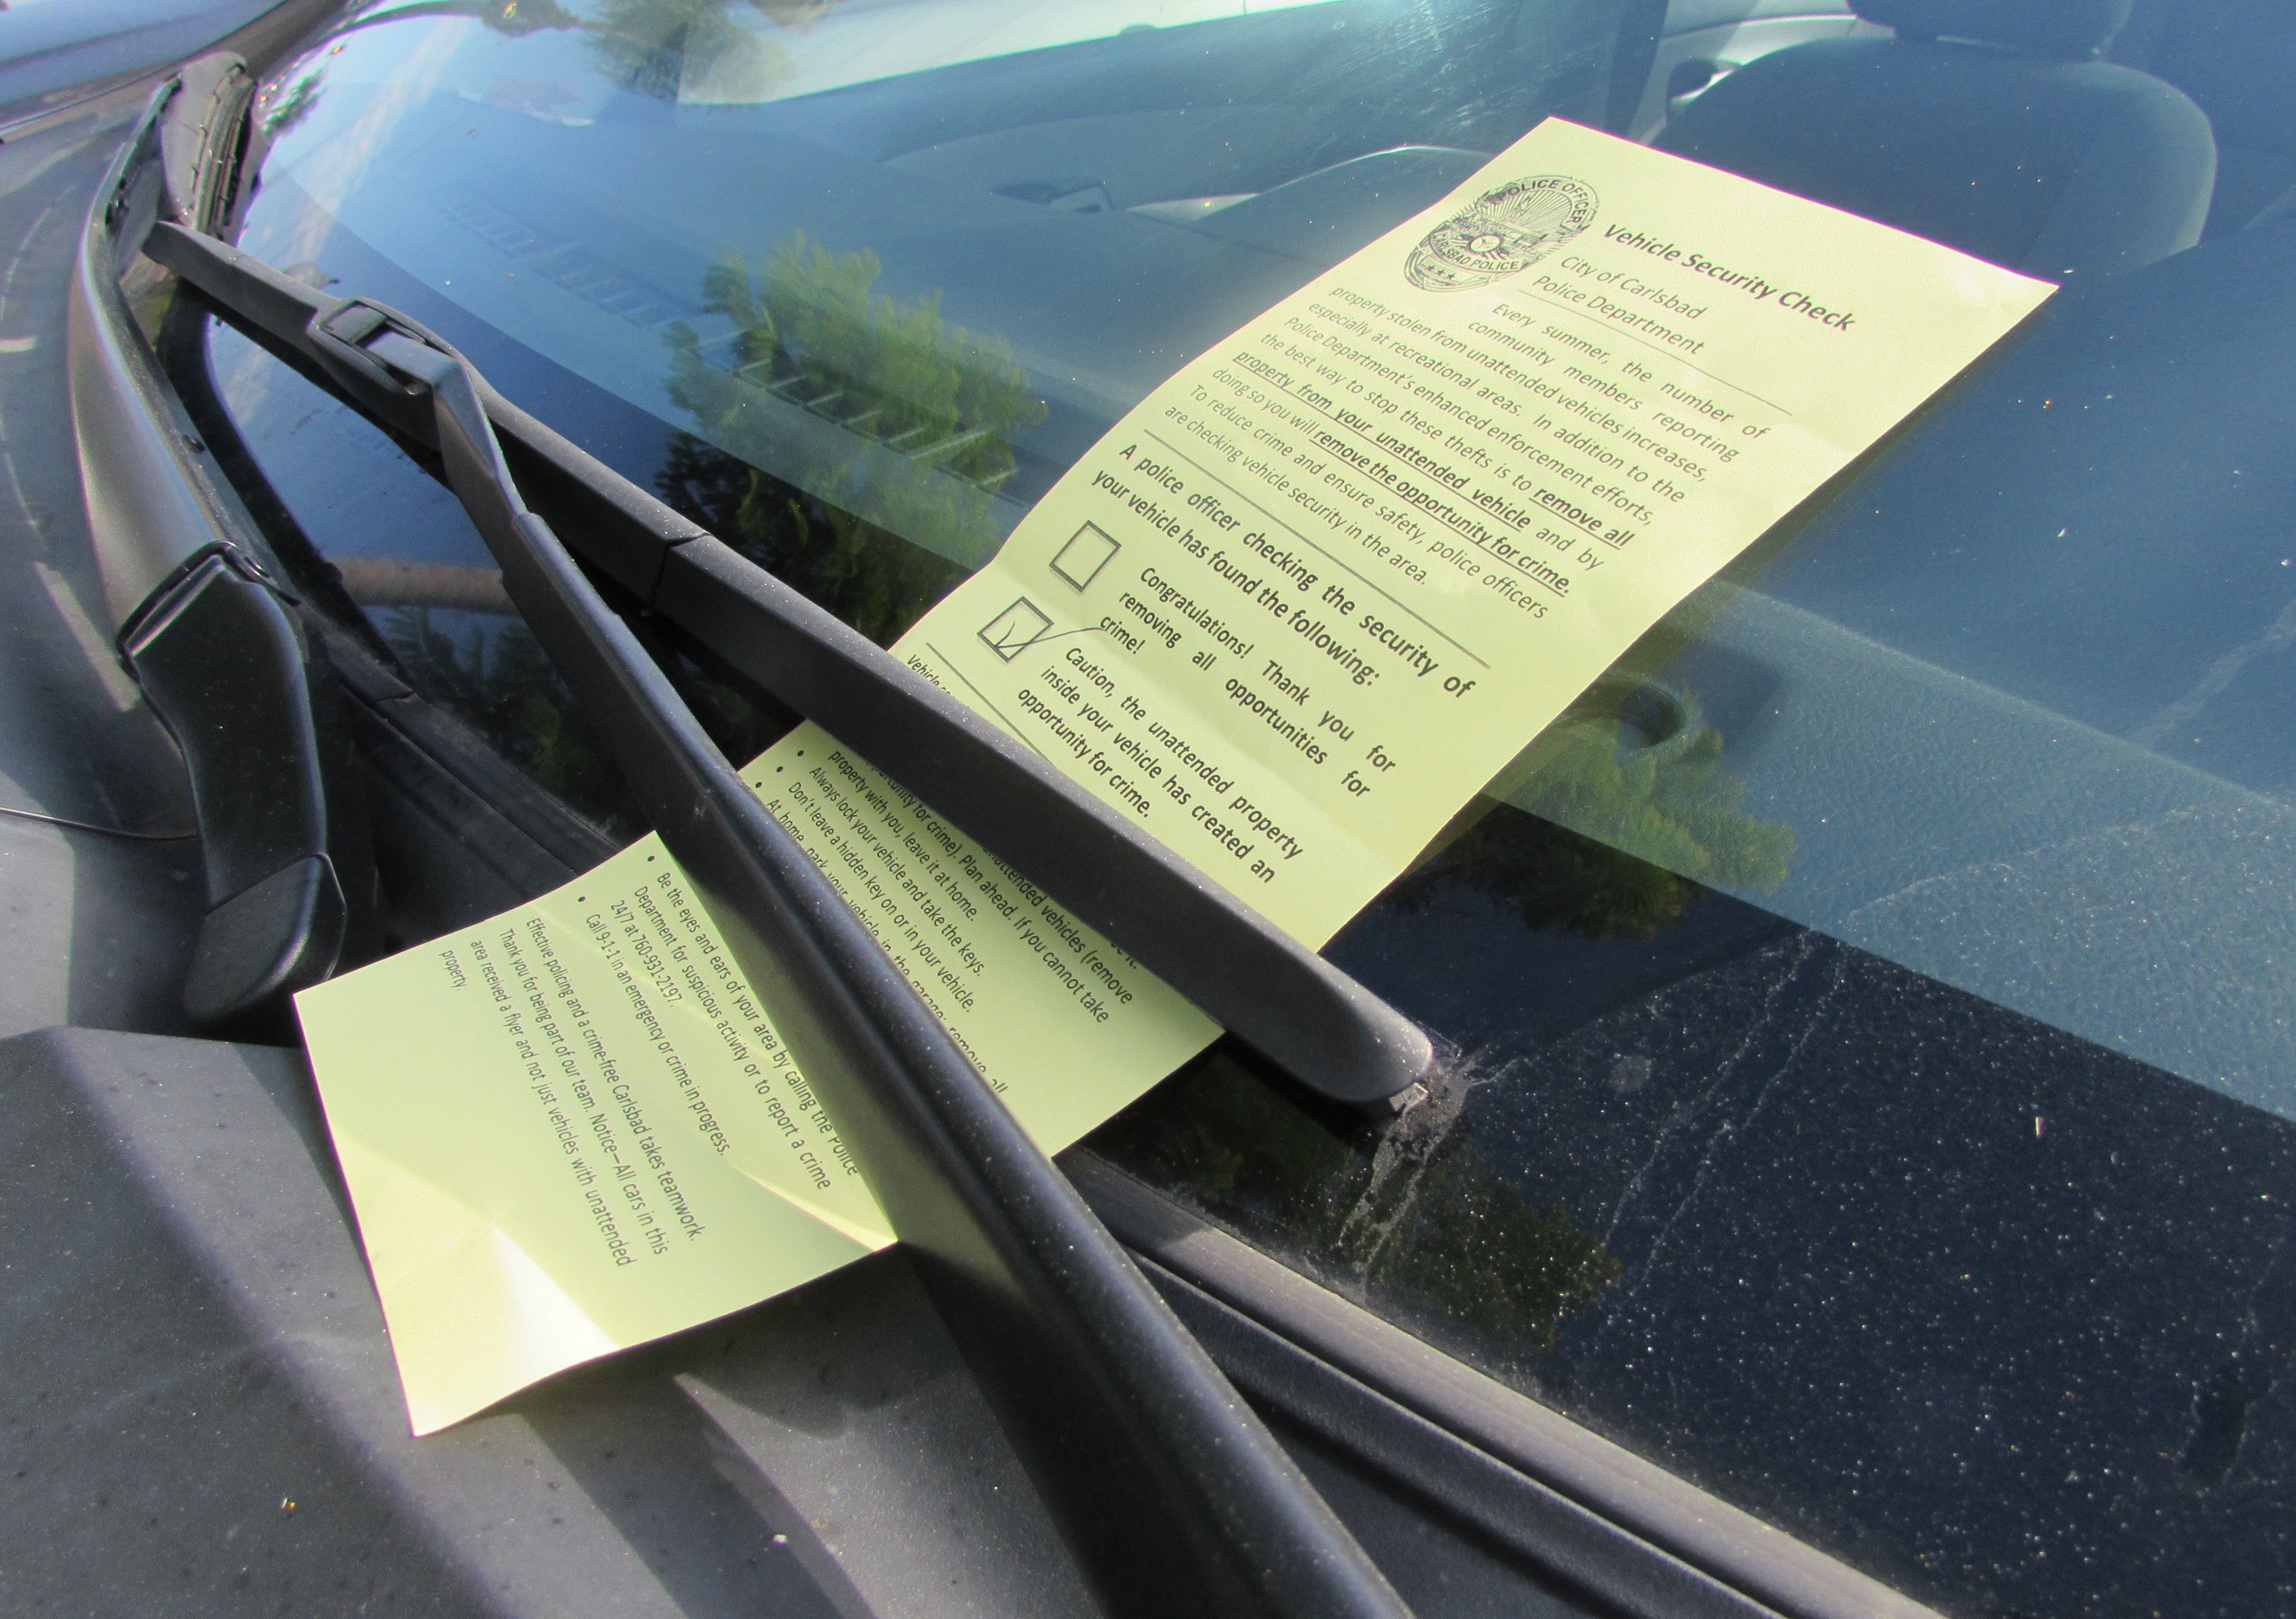 The Carlsbad Police Department is leaving pamphlets on cars in recreation areas to alert people whether or not their car is secure from crime. Photo by Ellen Wright